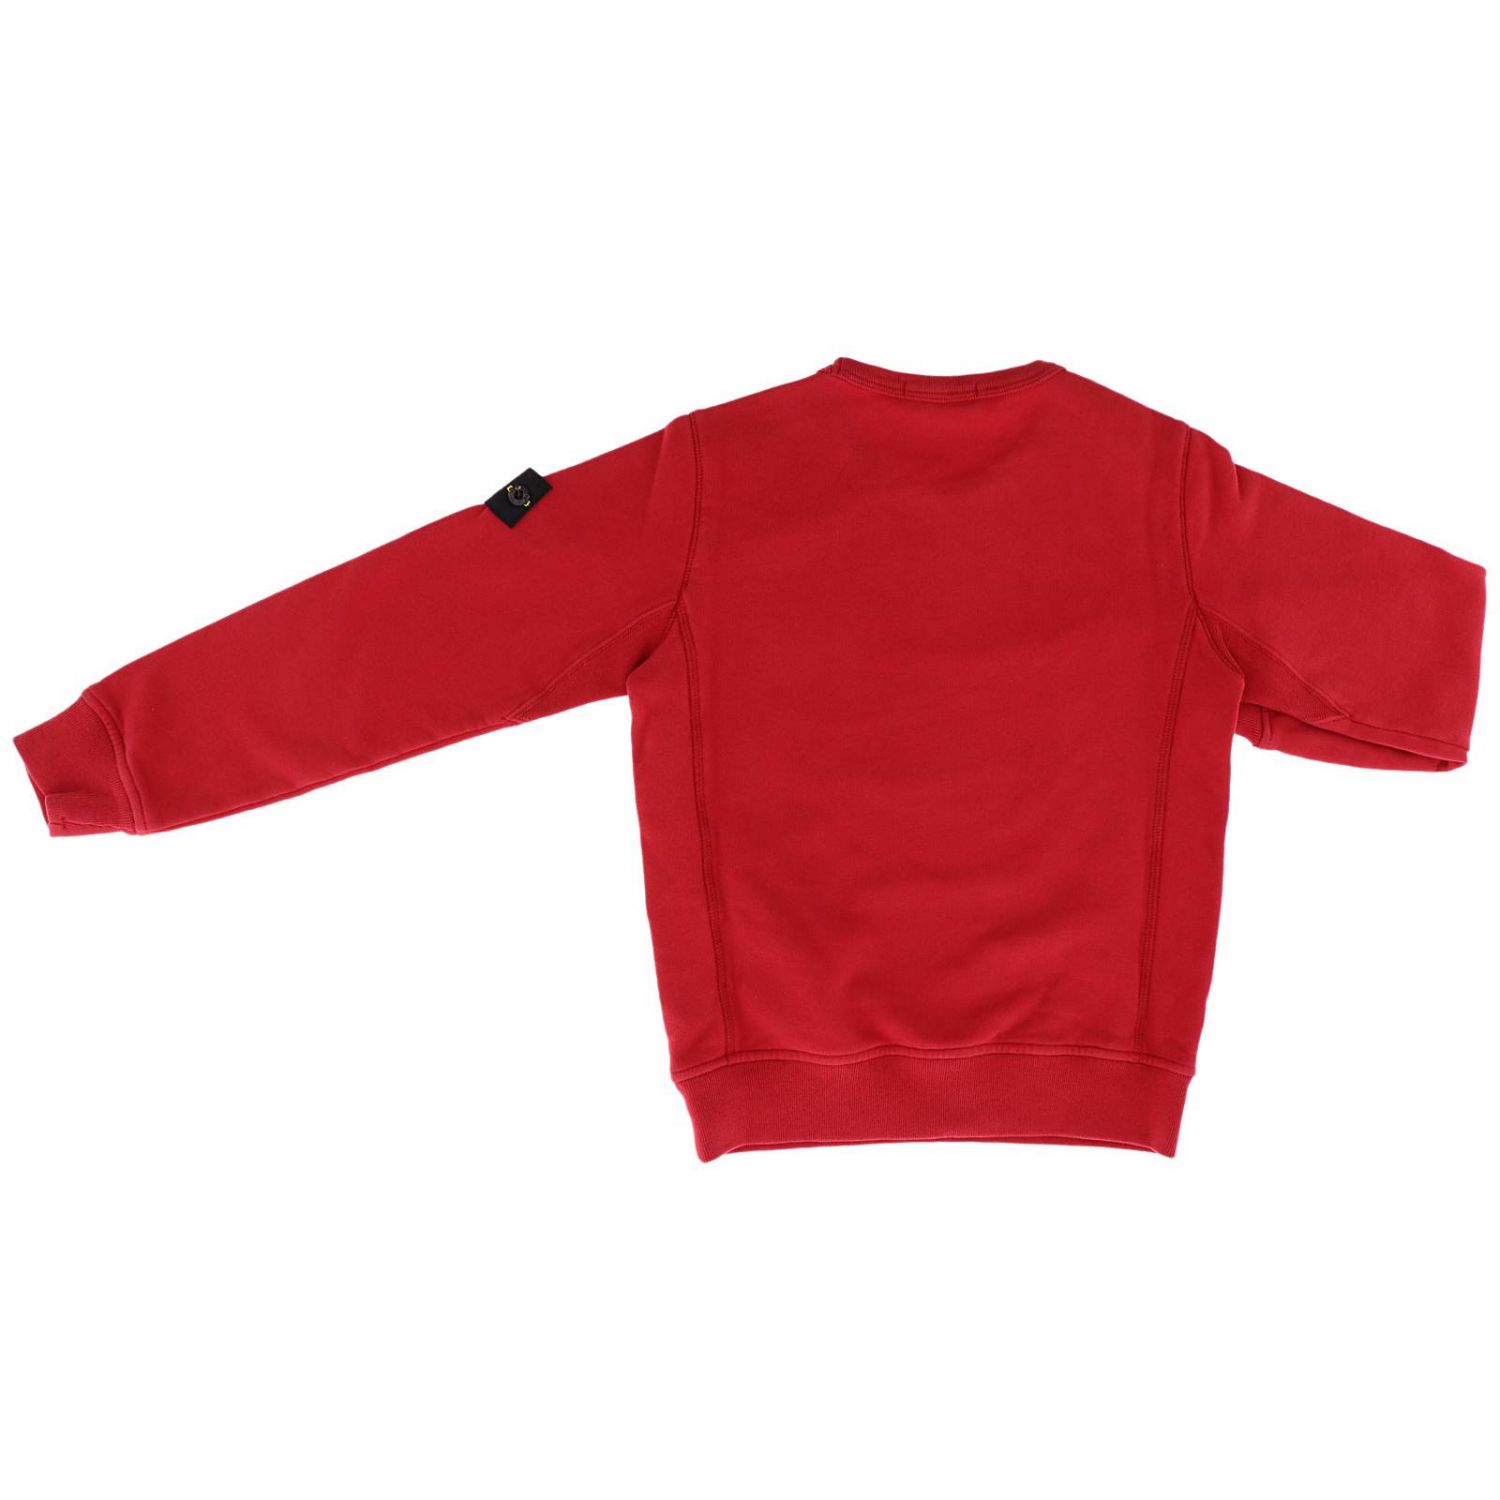 Stone Island Junior Outlet: sweater for boys - Red | Stone Island ...